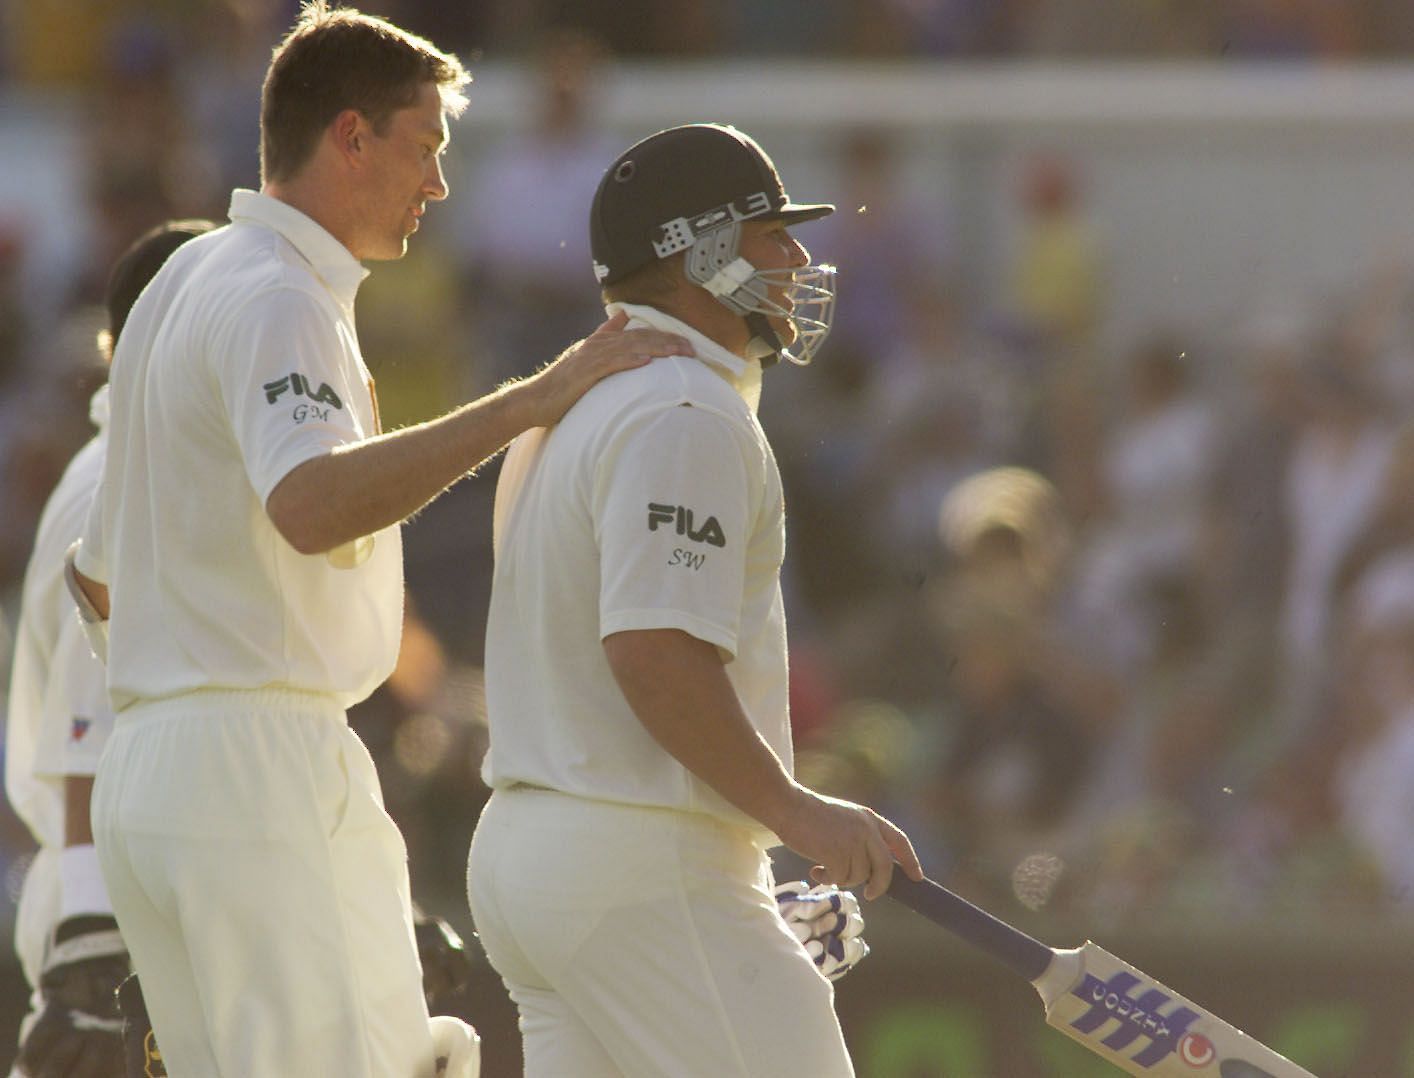 A dejected Shane Warne of Australia is consoled by teammate Glenn McGrath after being dismissed for 99 (his highest Test score) against New Zealand in Perth in 2001. Pic: Getty Images